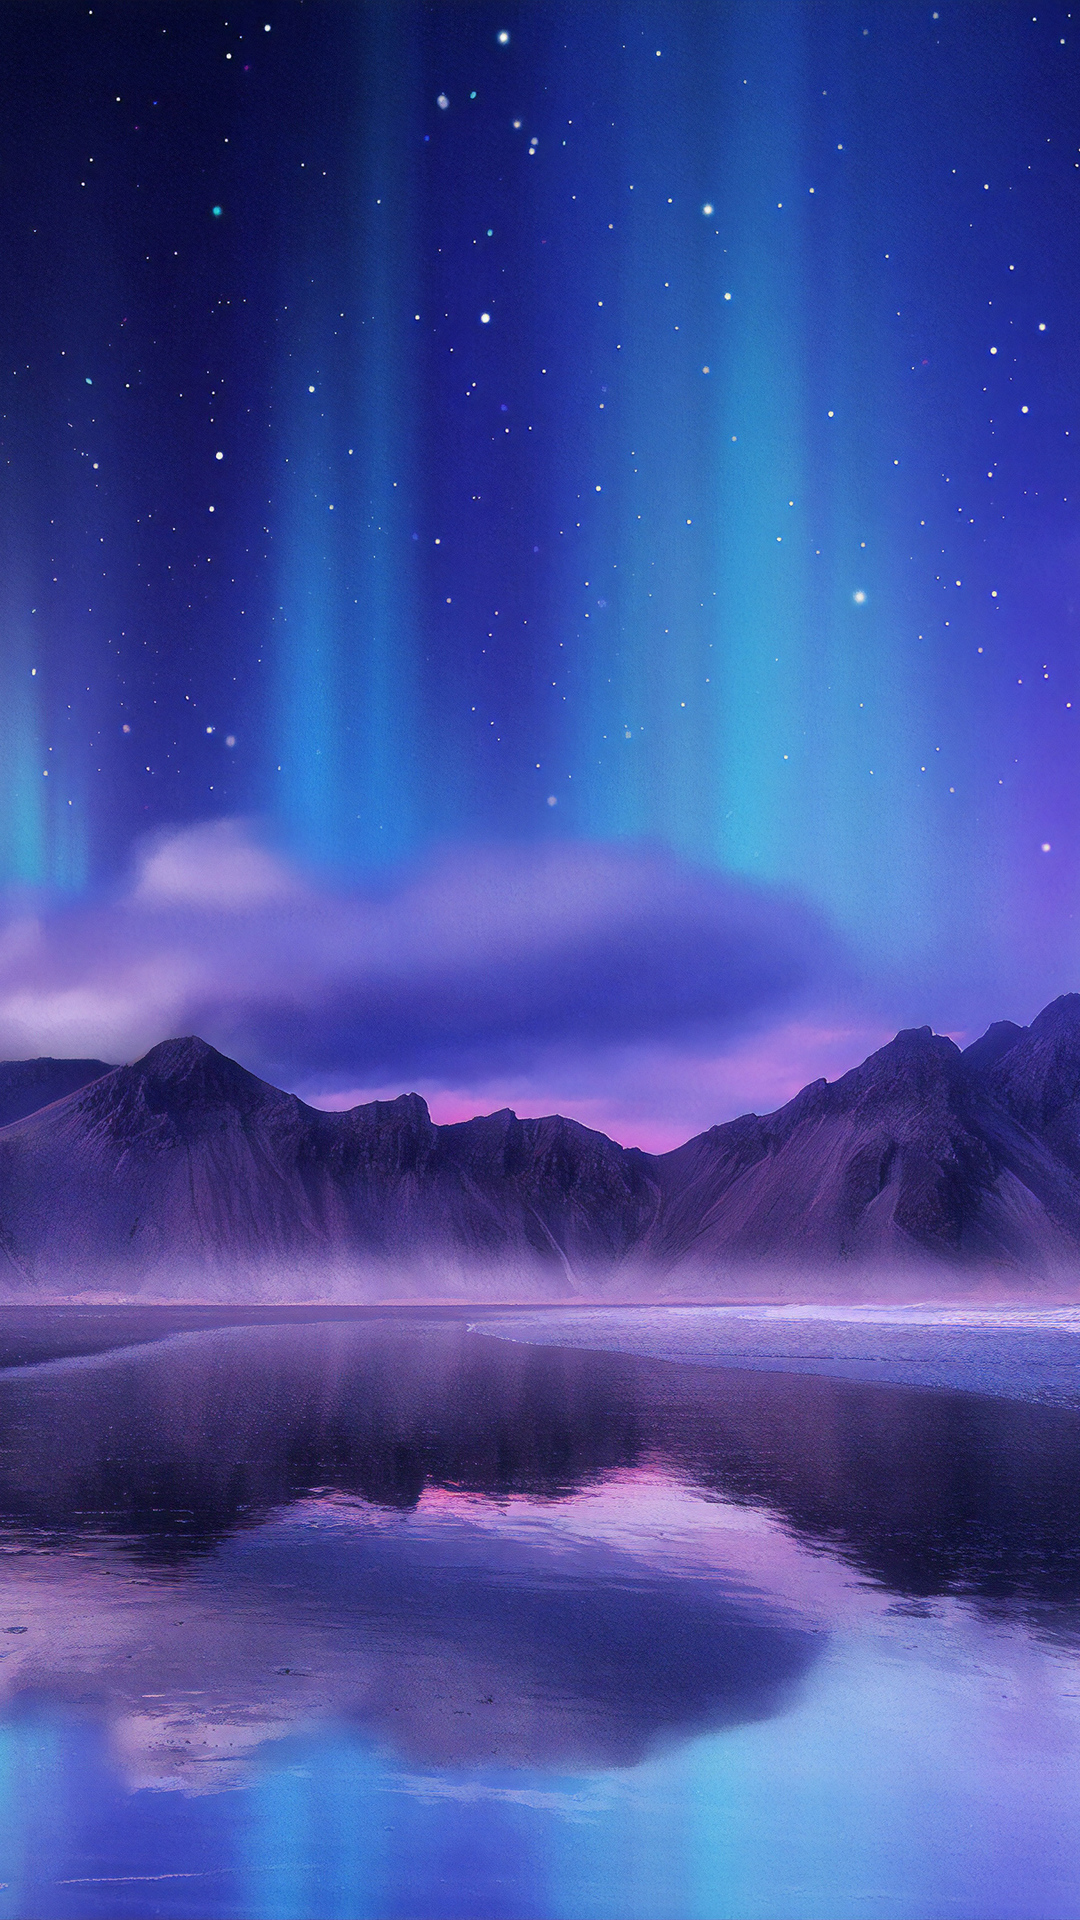 Northern Lights Iphone Wallpapers